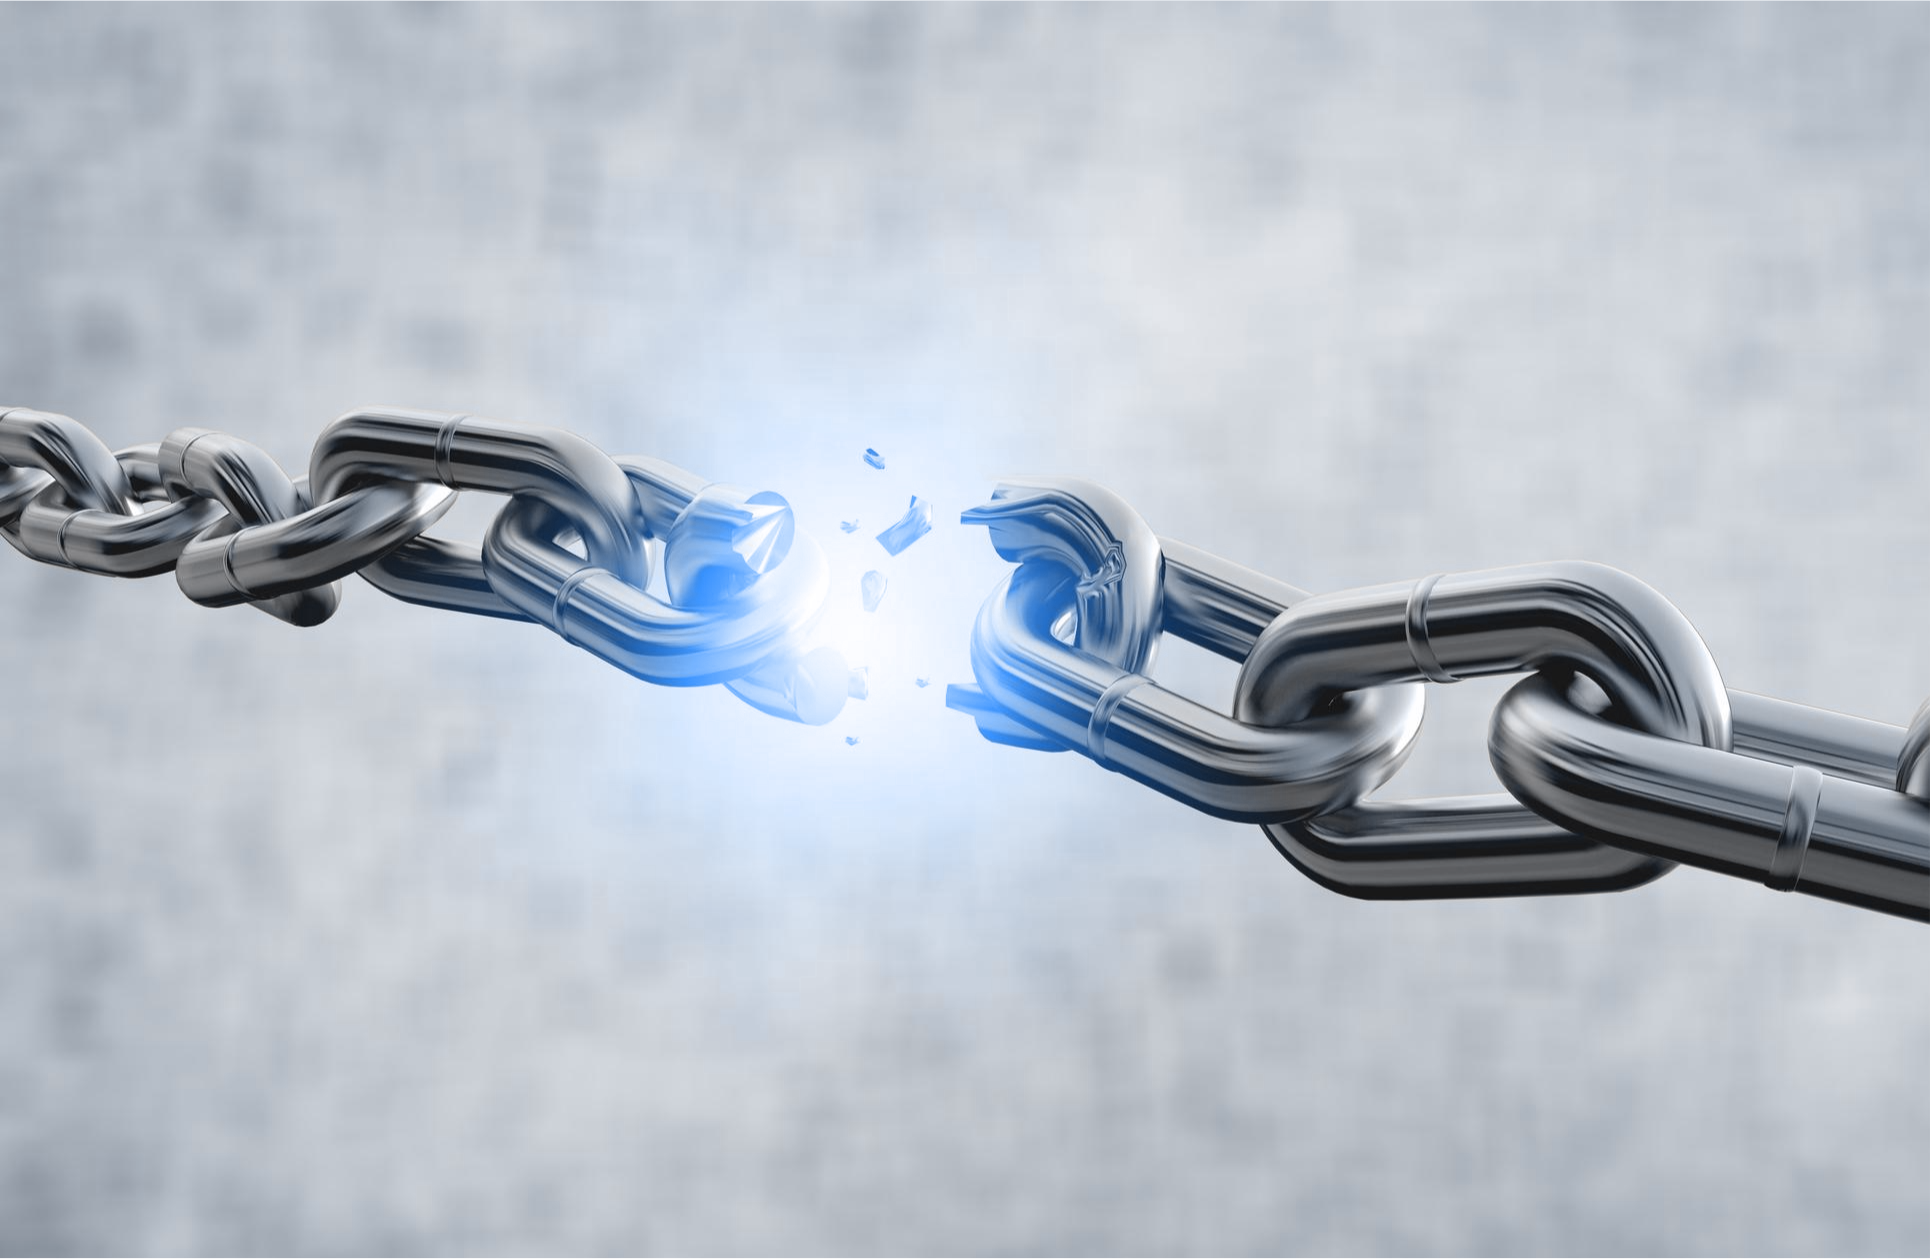 An image of broken links in a chain